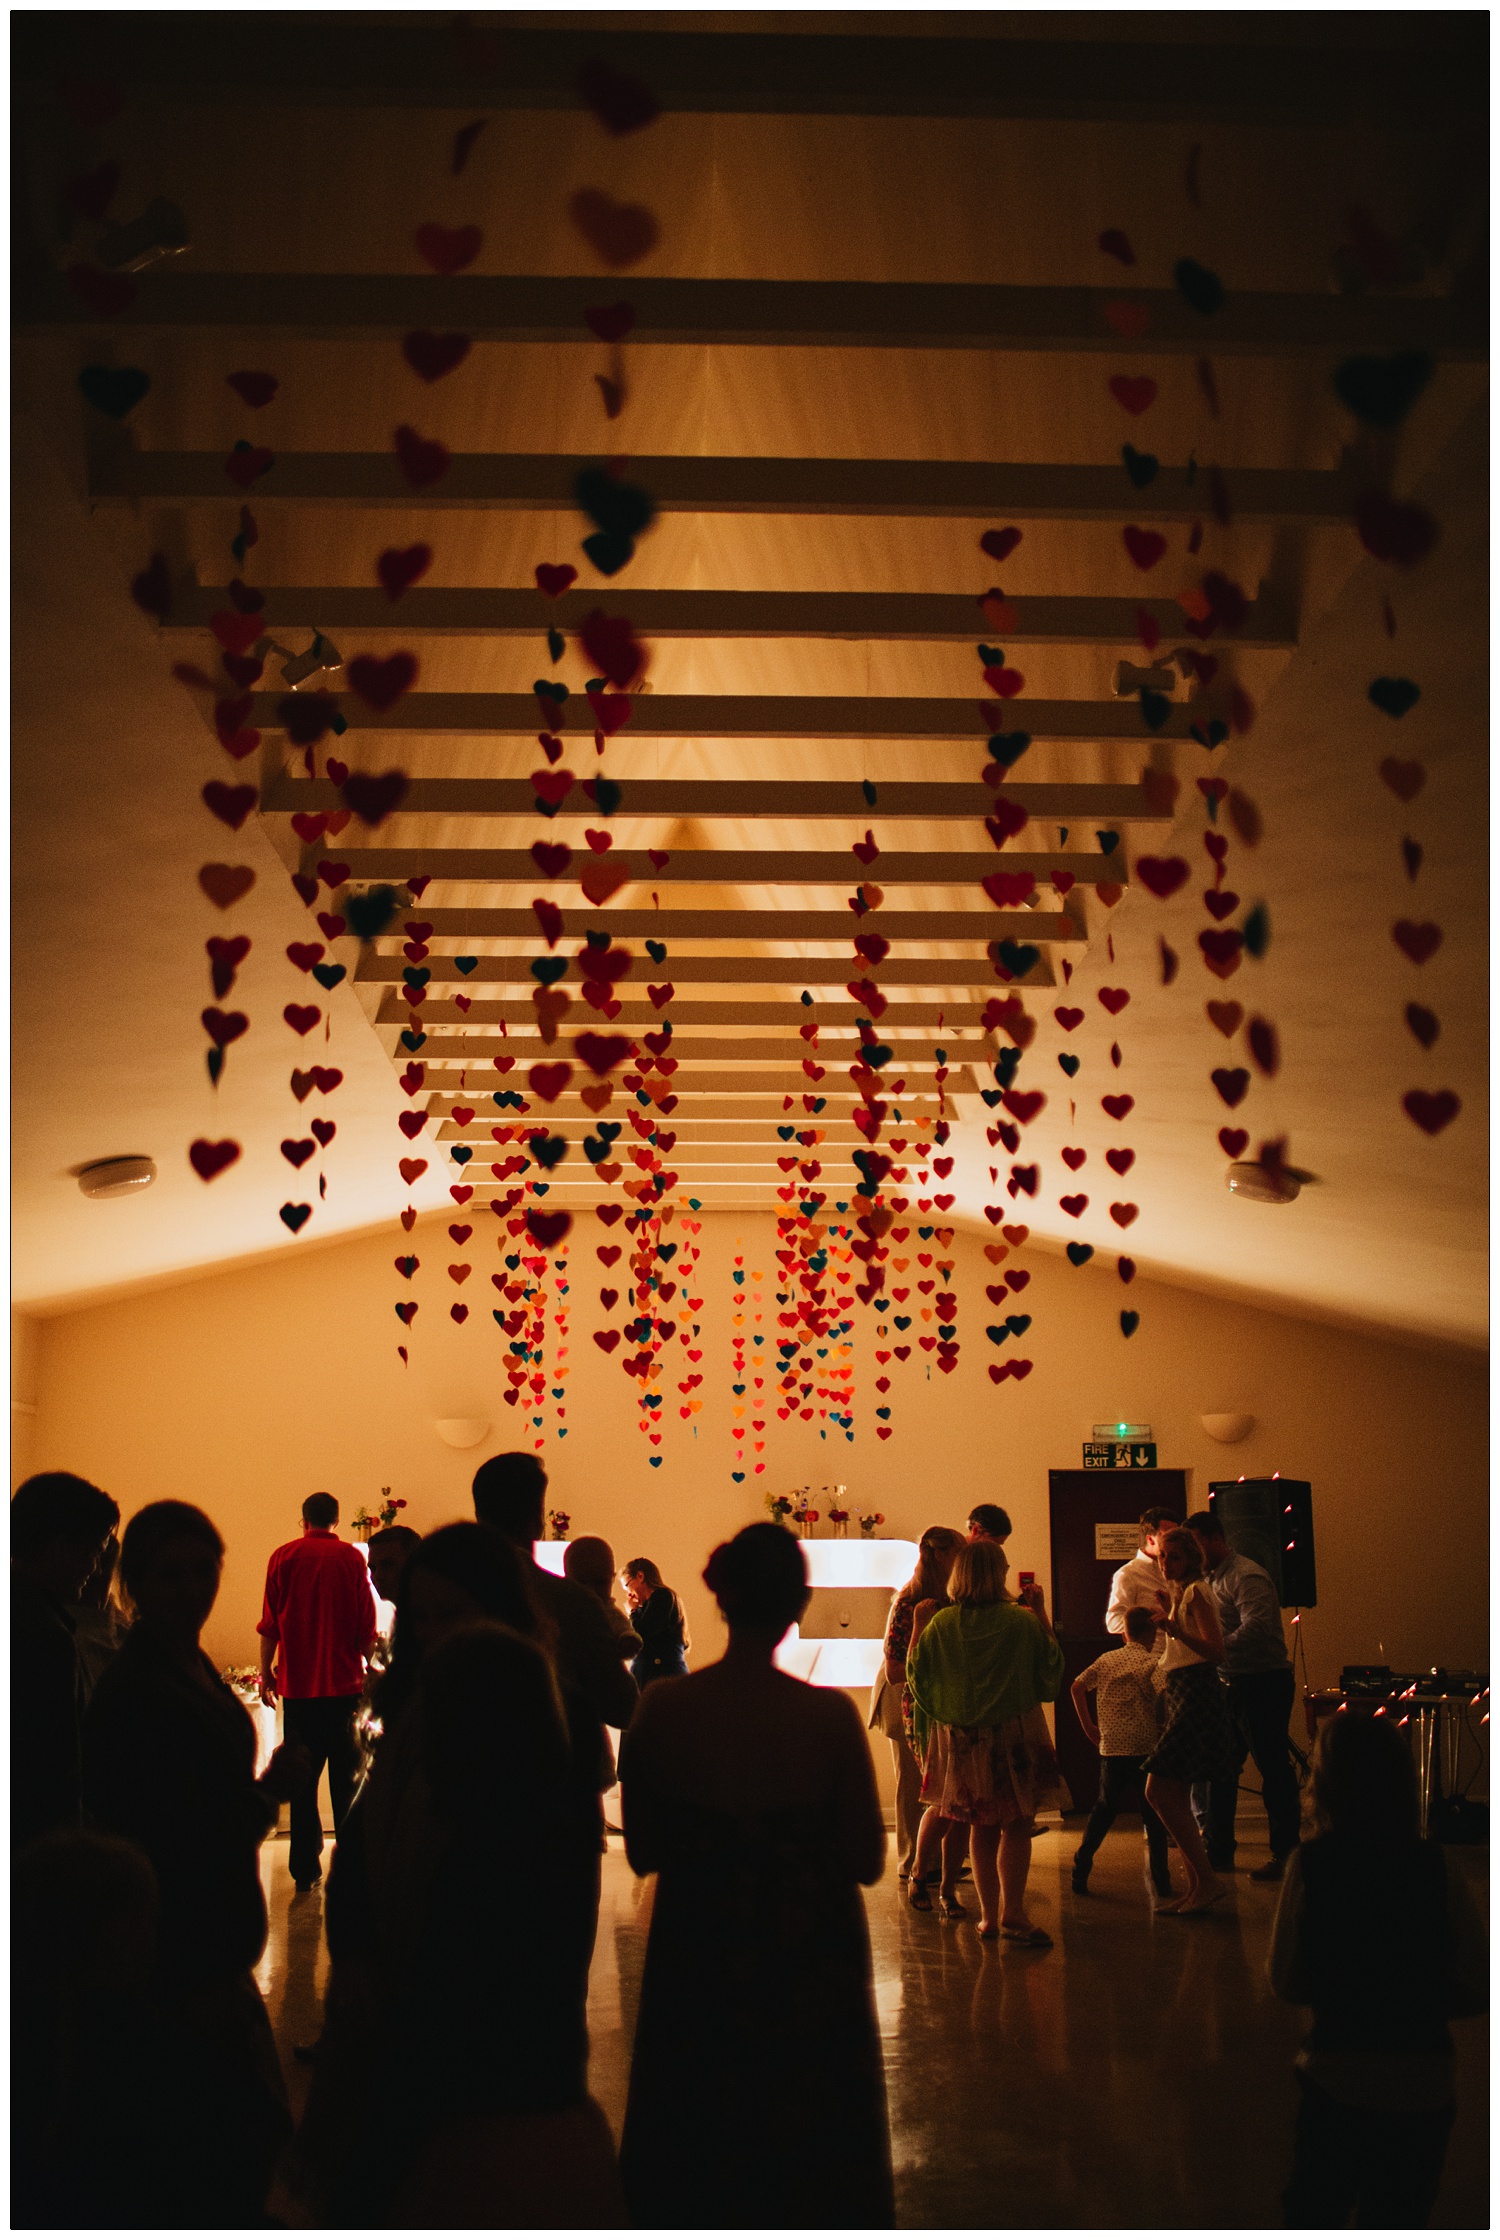 Strings of hearts hang from a ceiling. Silhouettes of wedding guests.